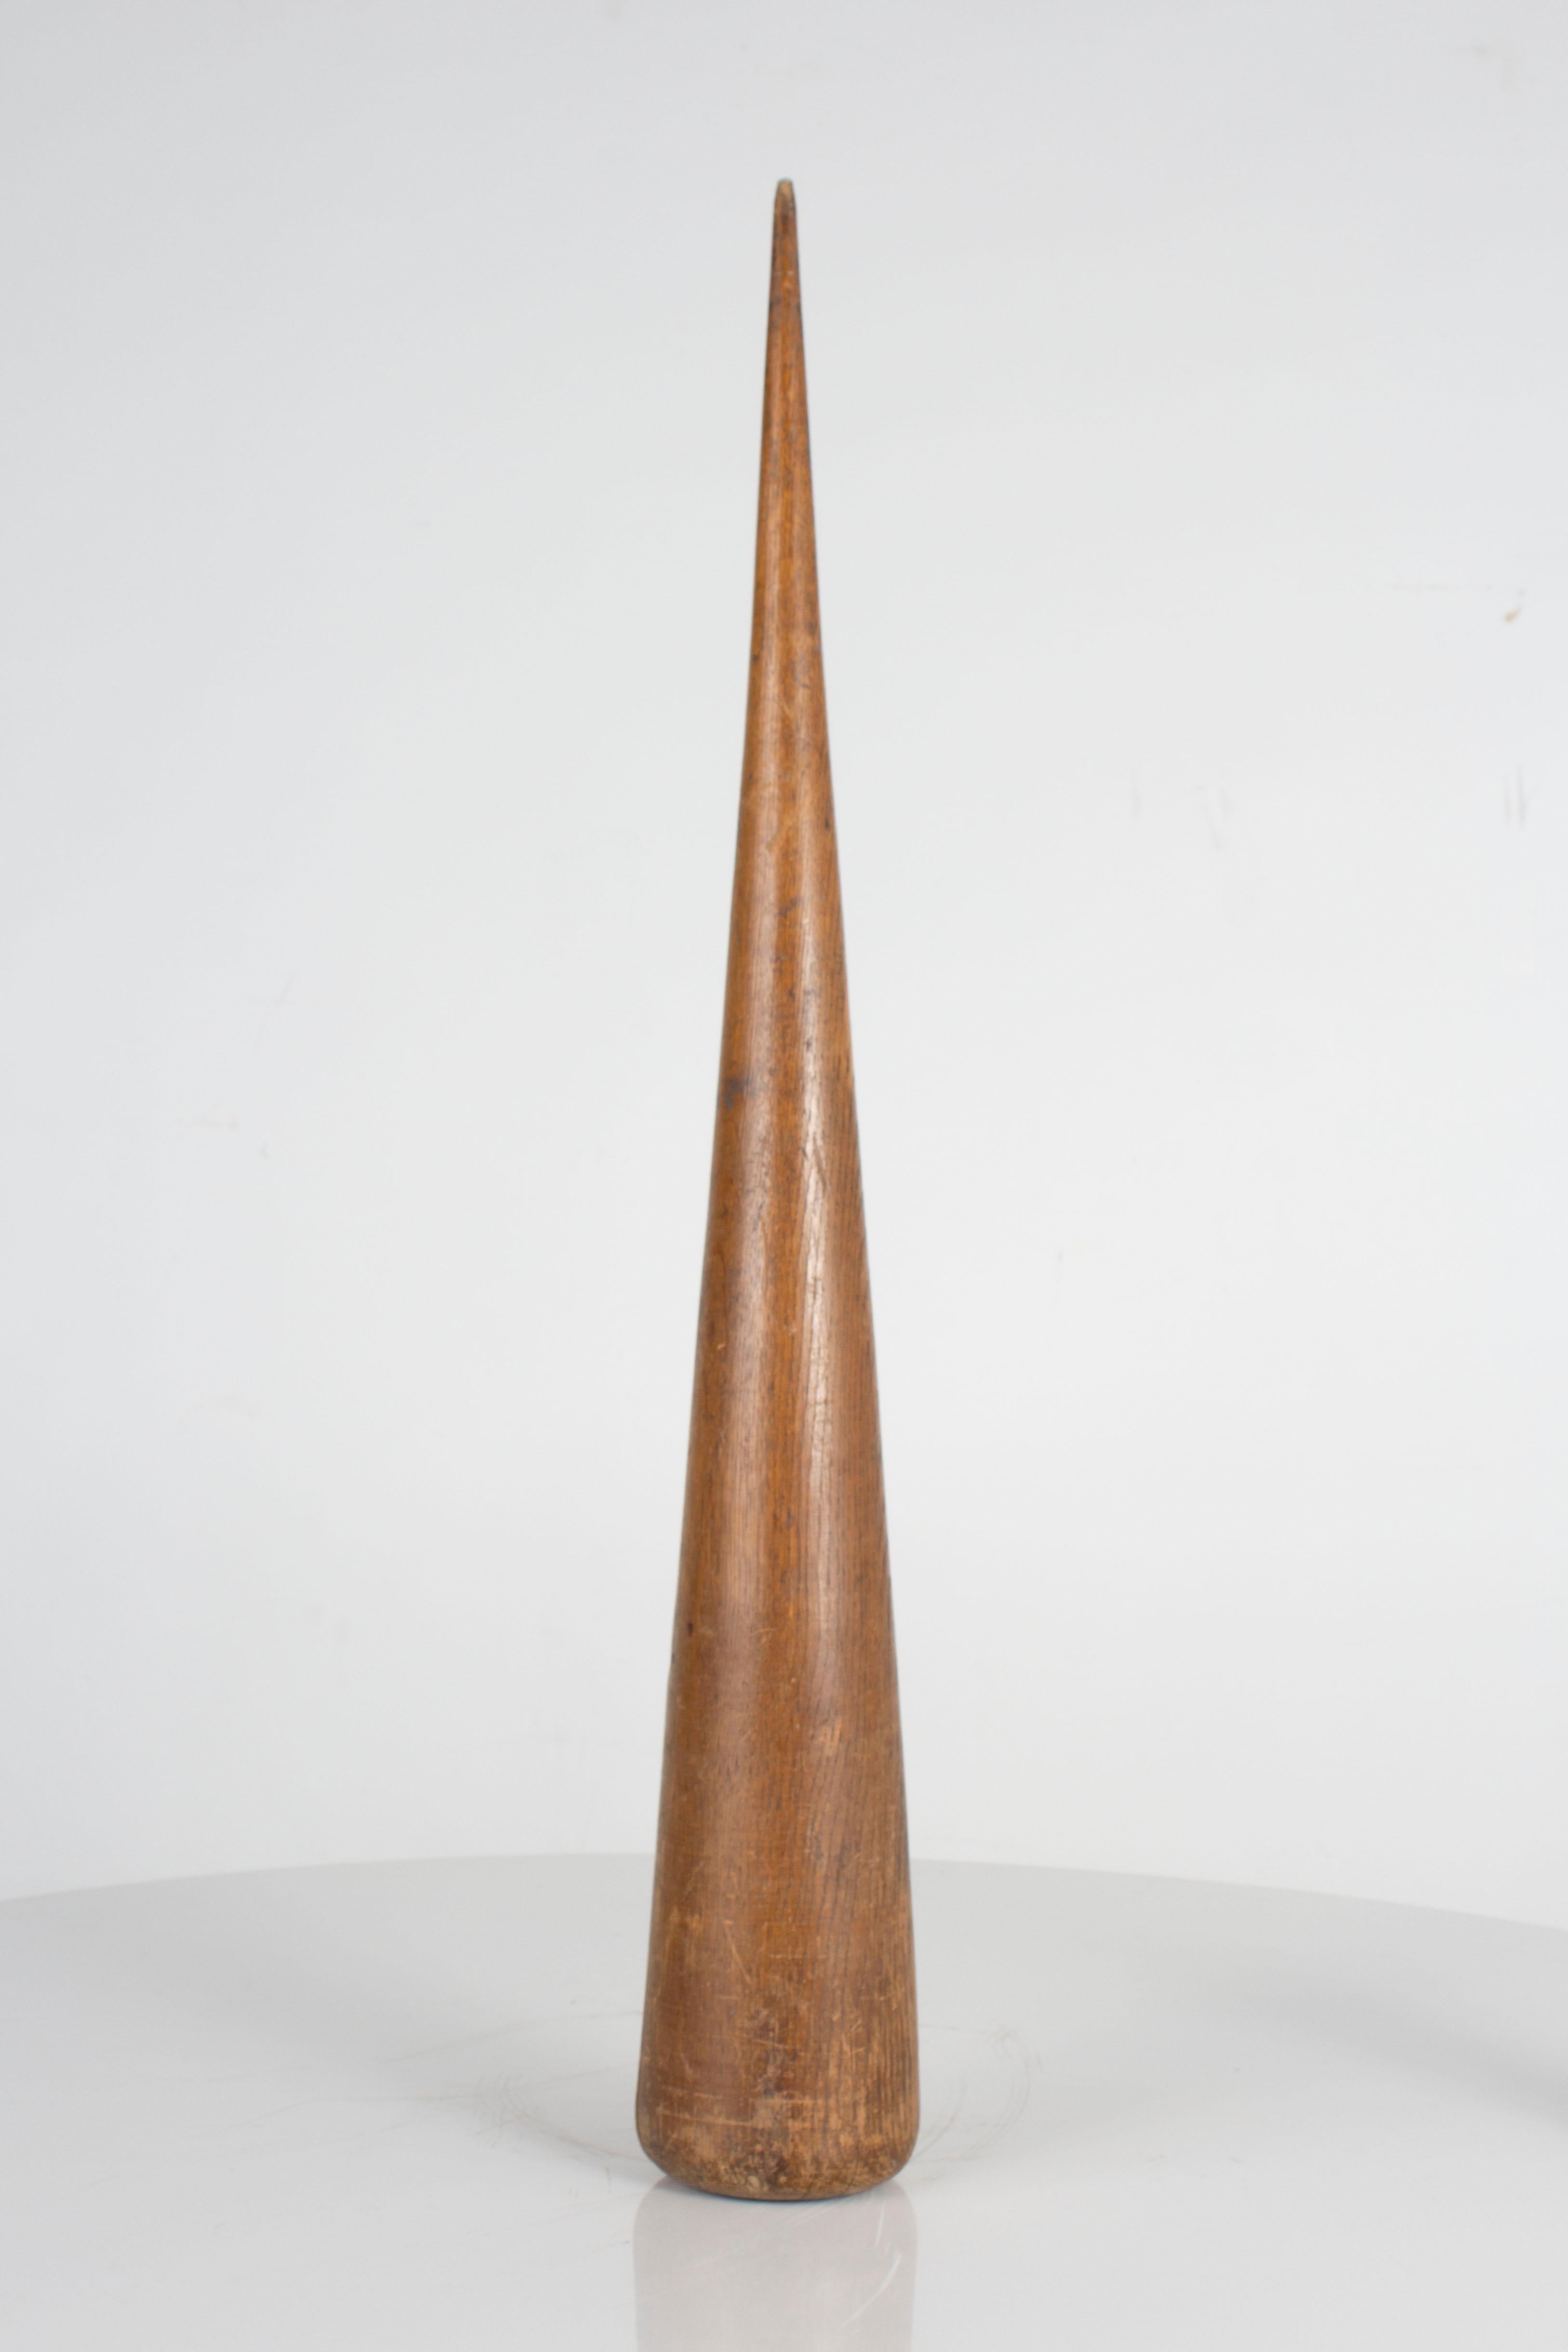 Monumental wood carved Conial sculpture

Sourced by our accessories team. Brendan Bass Estate Collection.

Measures: 6.5